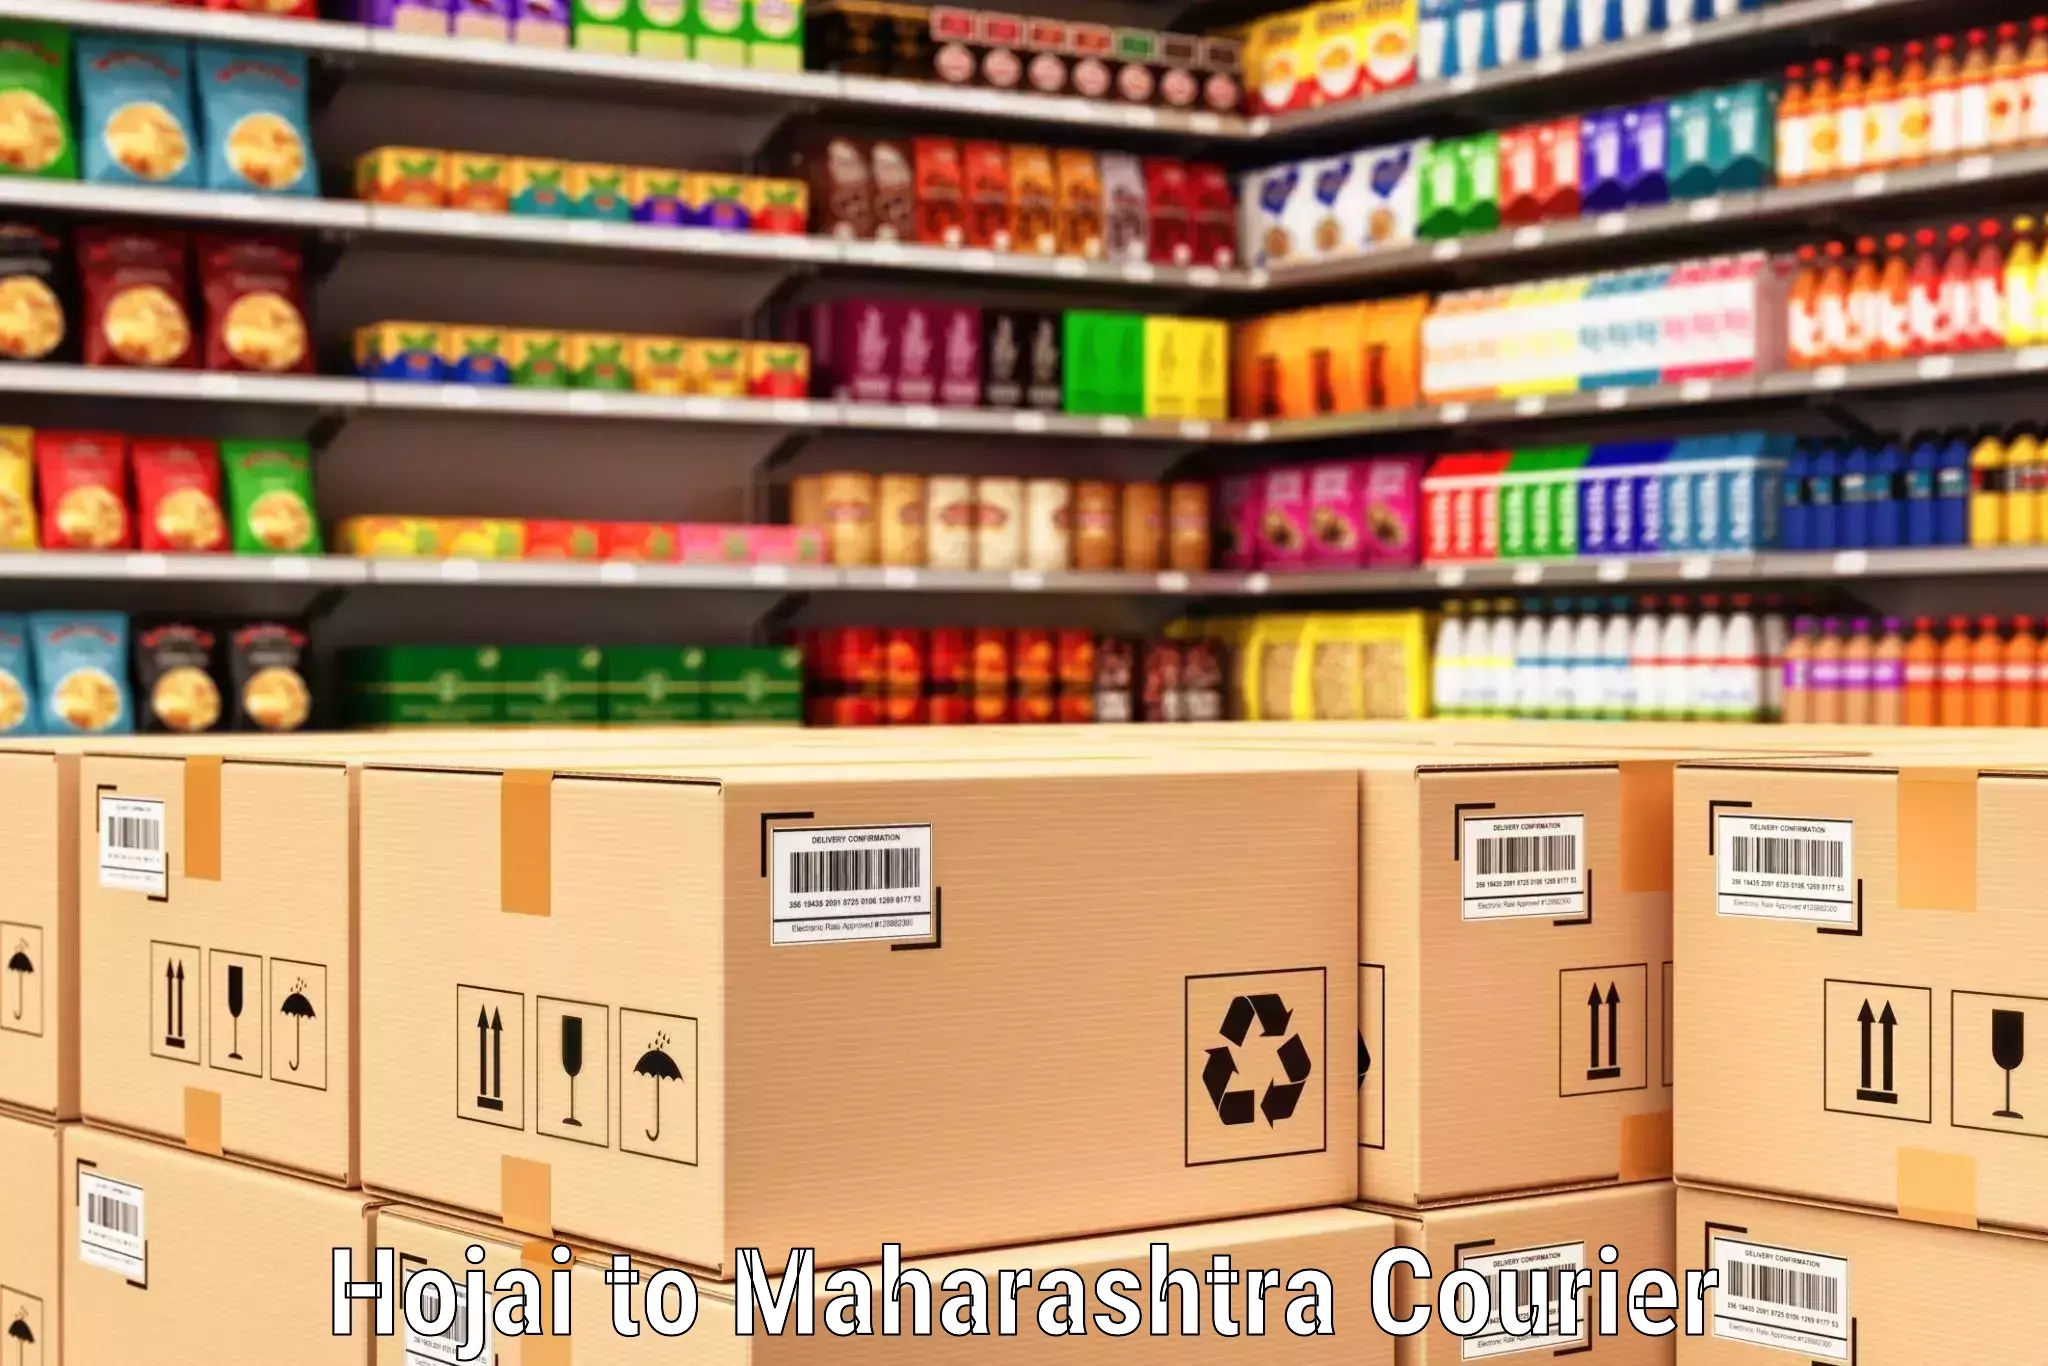 State-of-the-art courier technology Hojai to Maharashtra